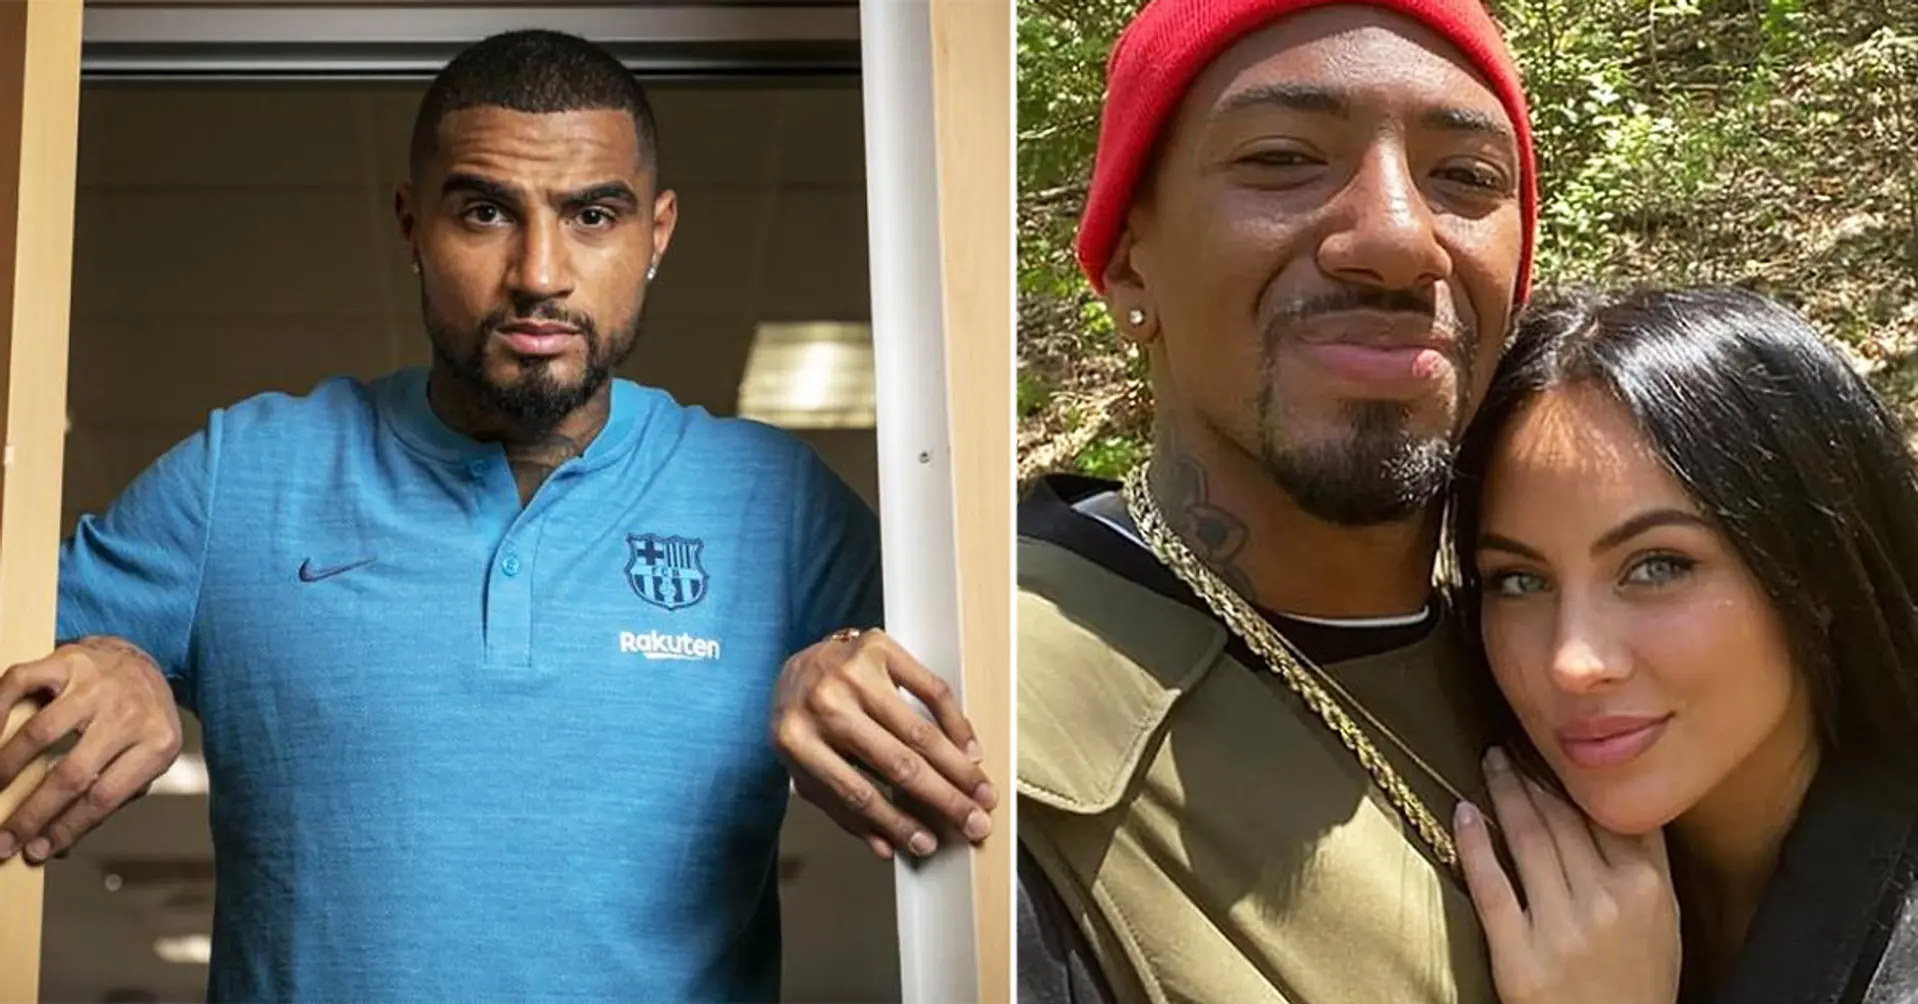 Kevin-Prince Boateng: 'I’ve distanced myself from my brother Jerome. I despise violence against women’